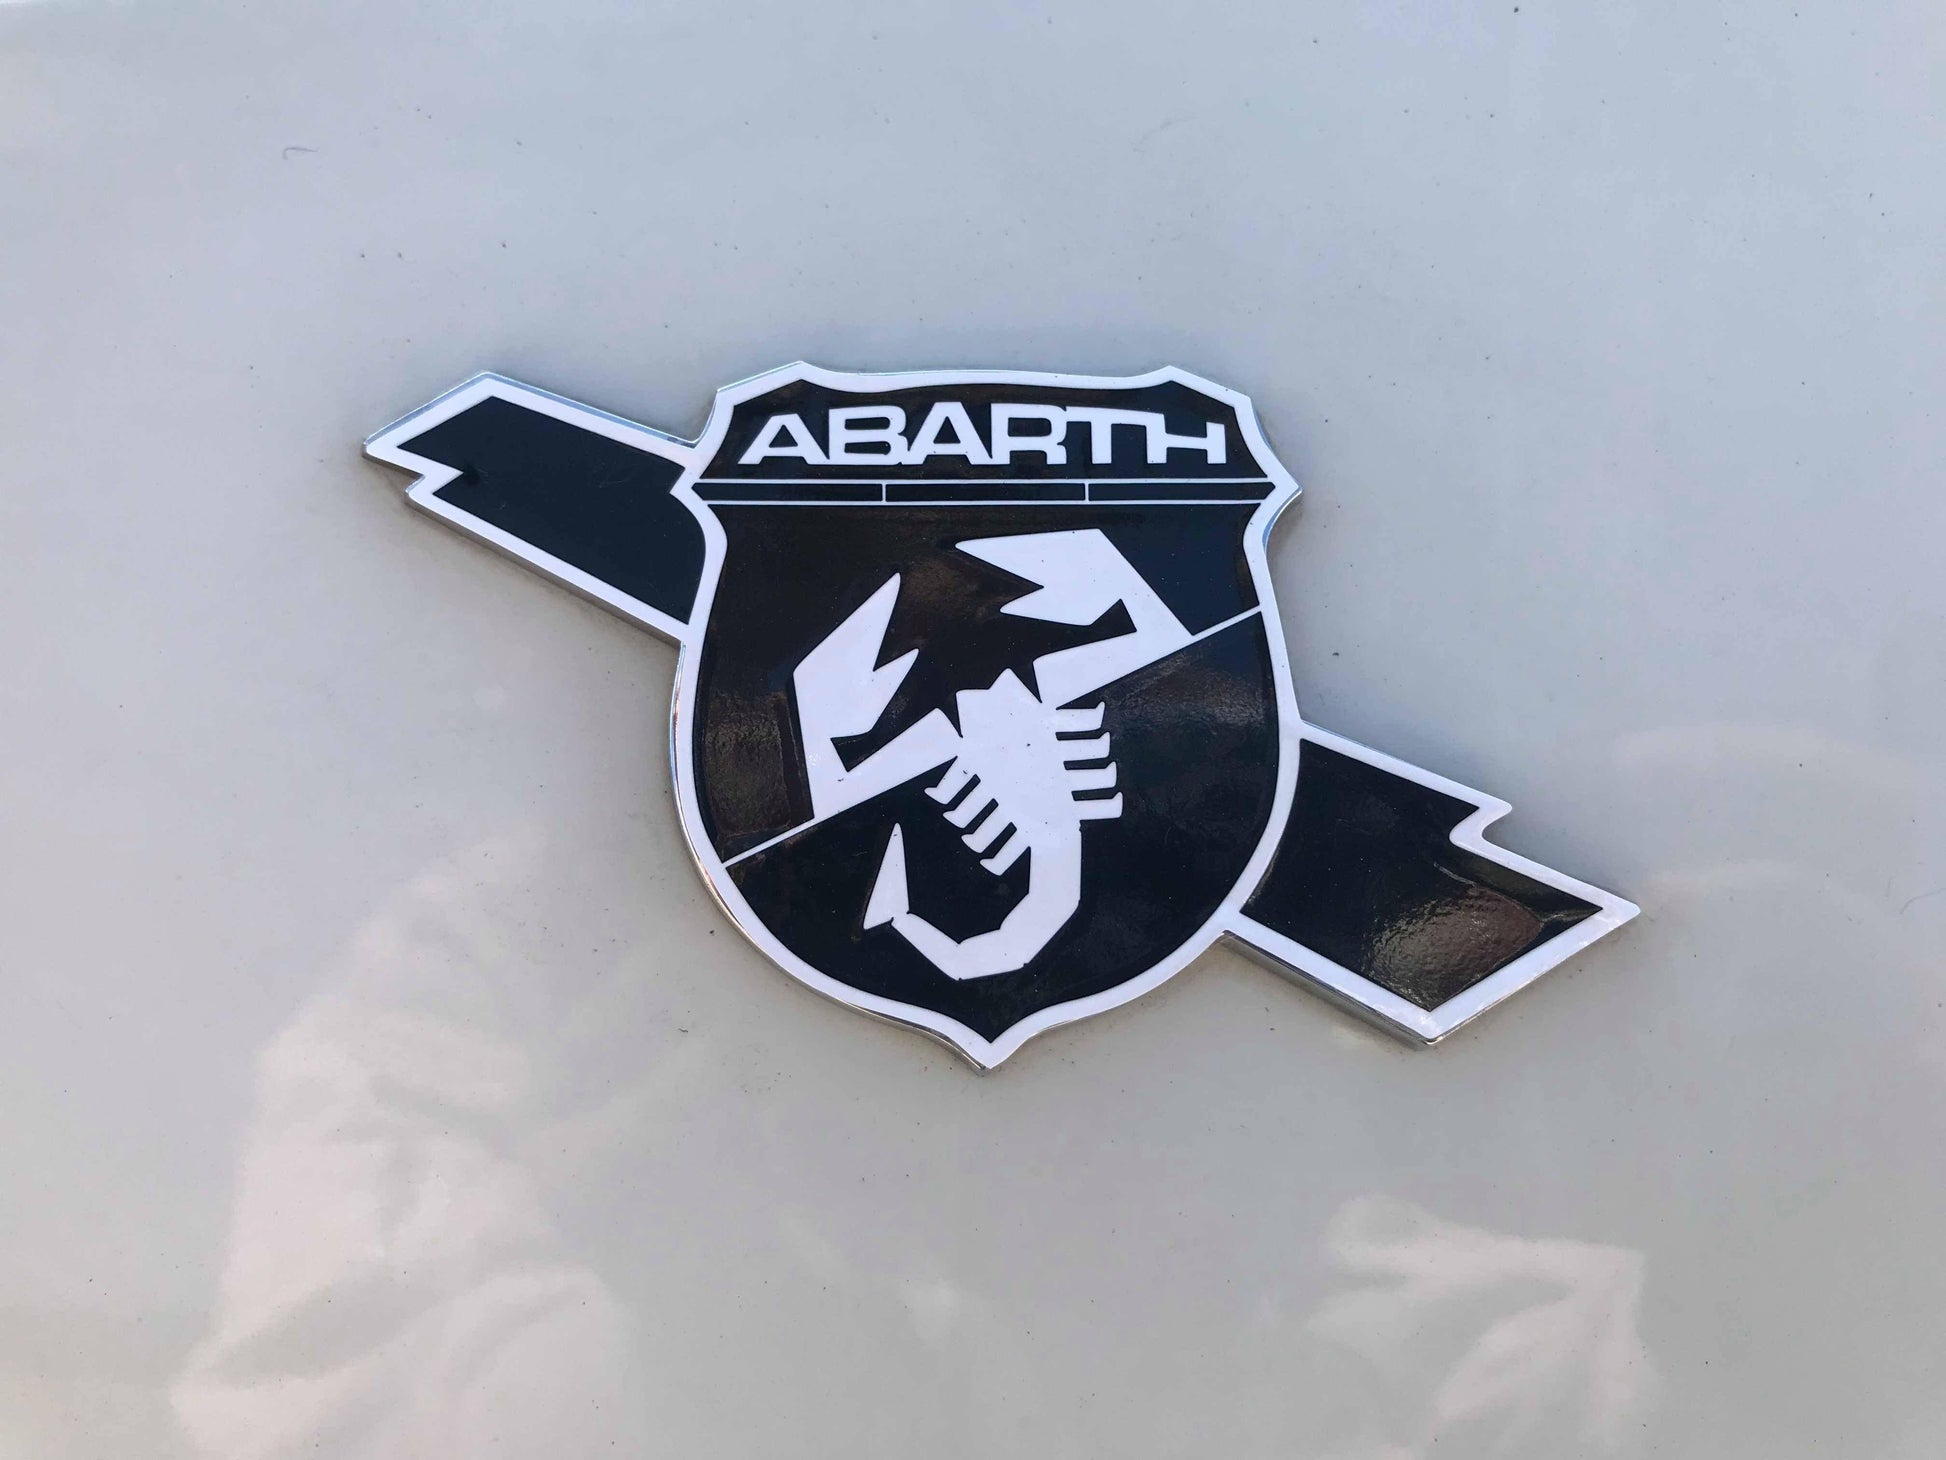 Abarth Grande Punto Badge decals set of four including side badges - Abarth Tuning